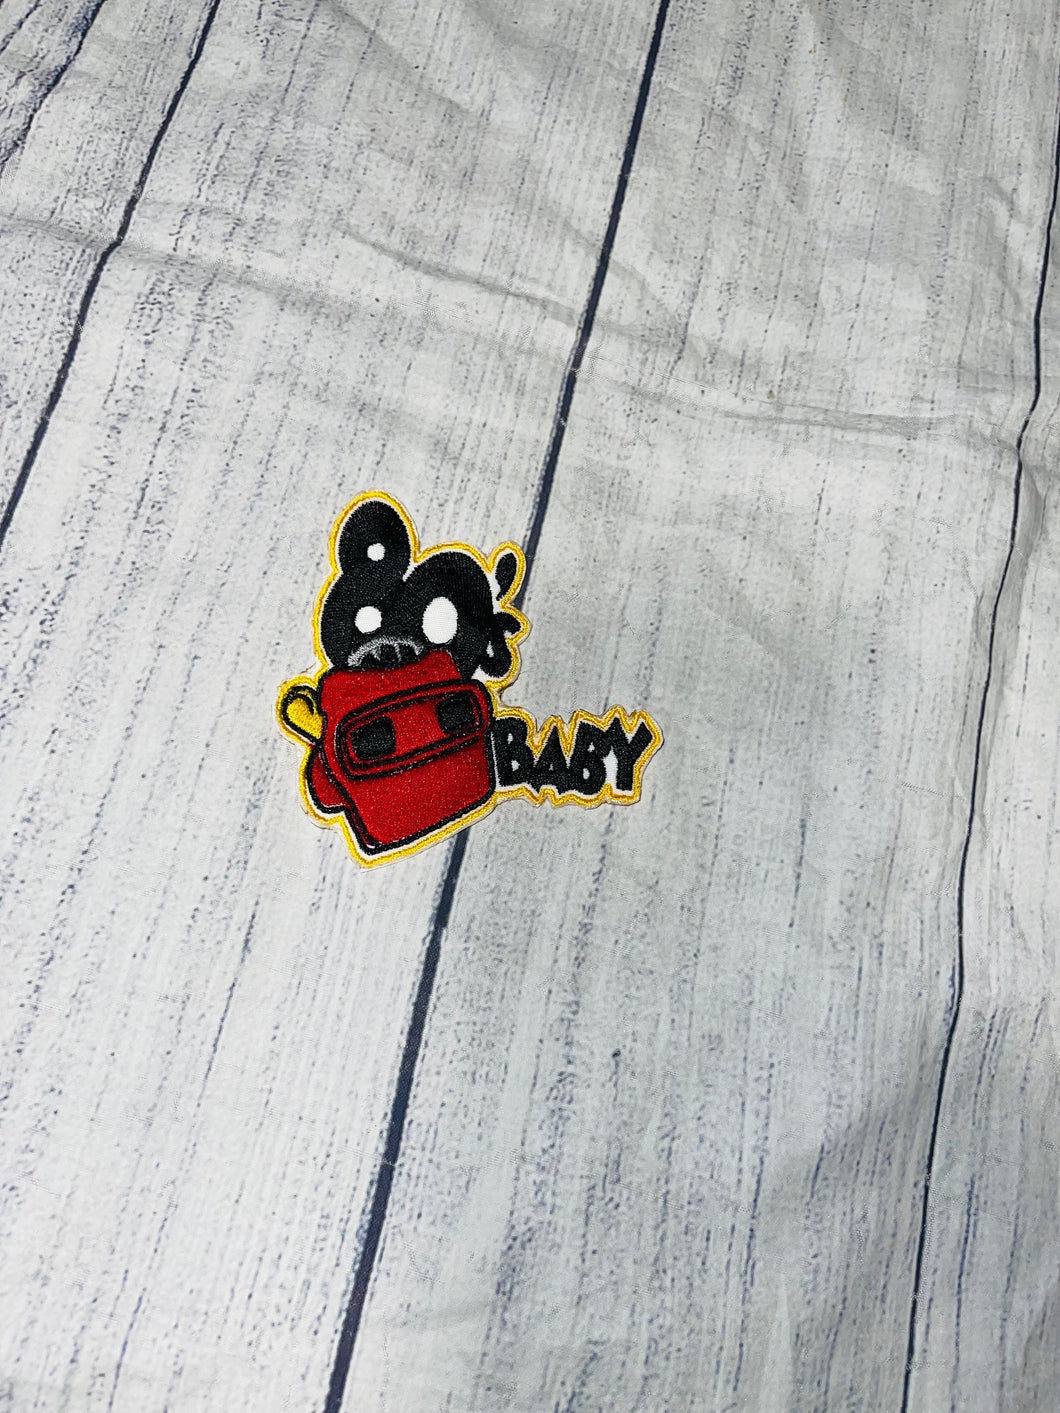 80s baby Embroidery Patch